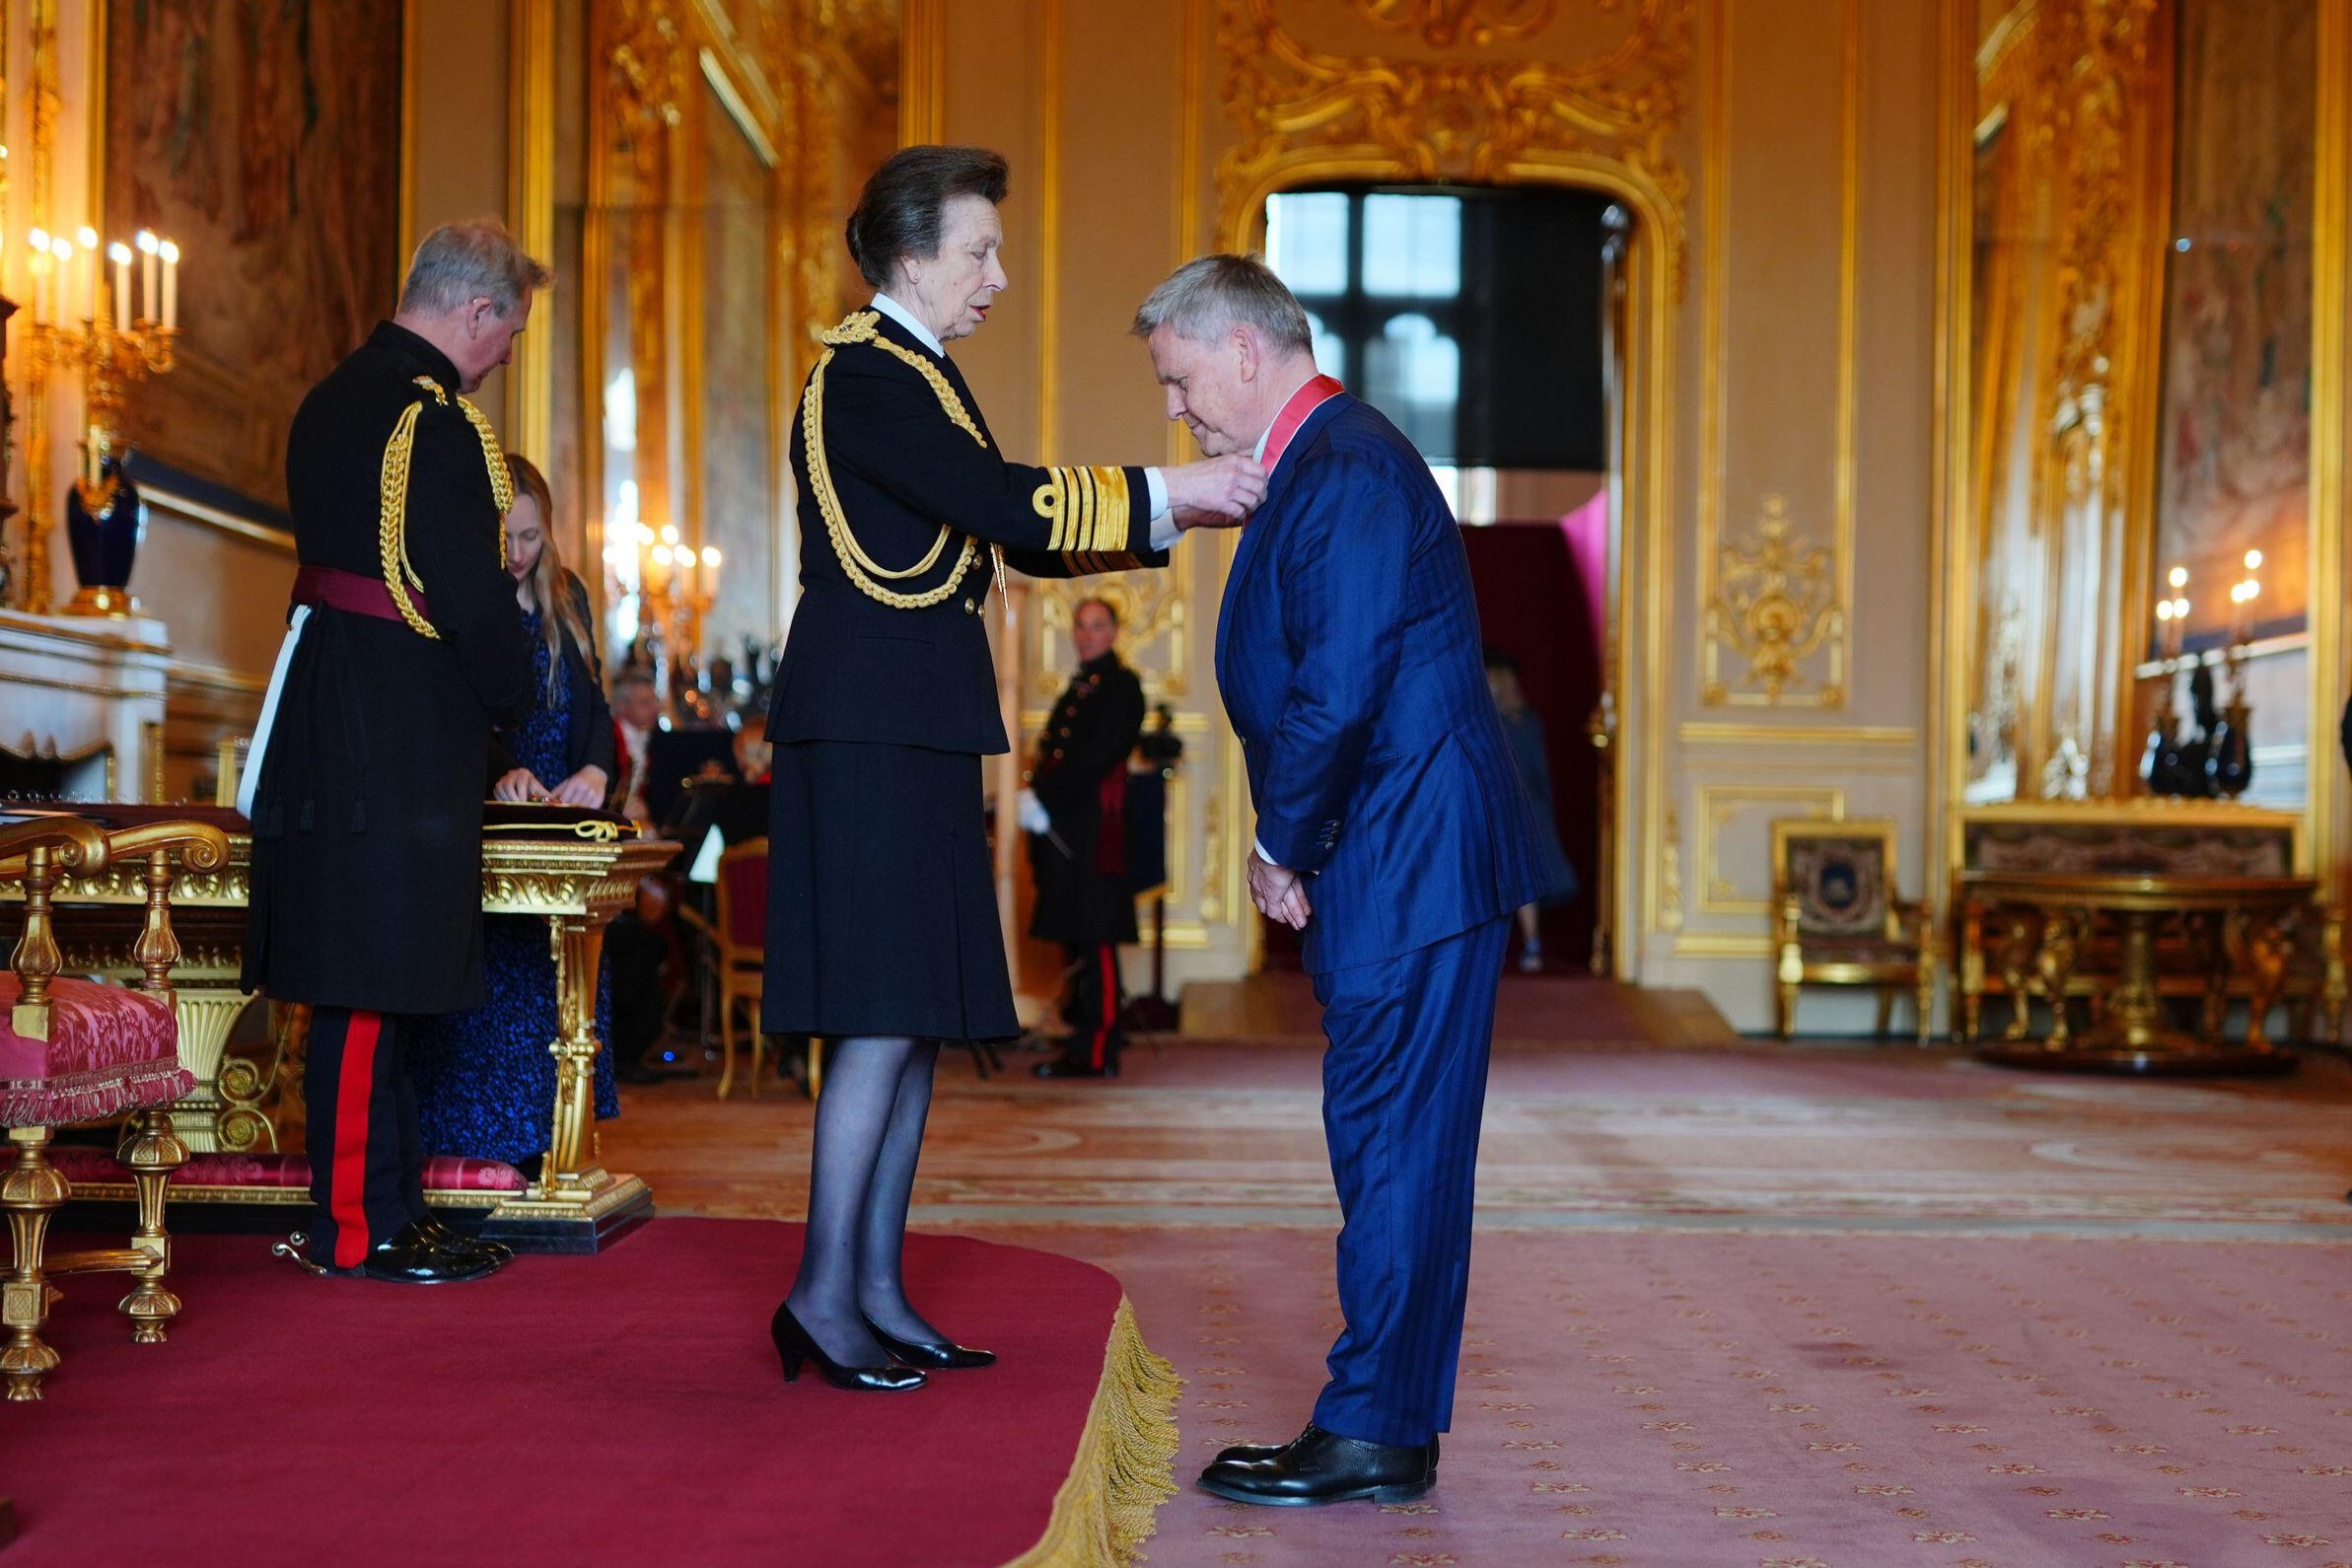 Robert Van de Noort is invested as a Commander of the Order of the British Empire by HRH The Princess Royal, at Windsor Castle